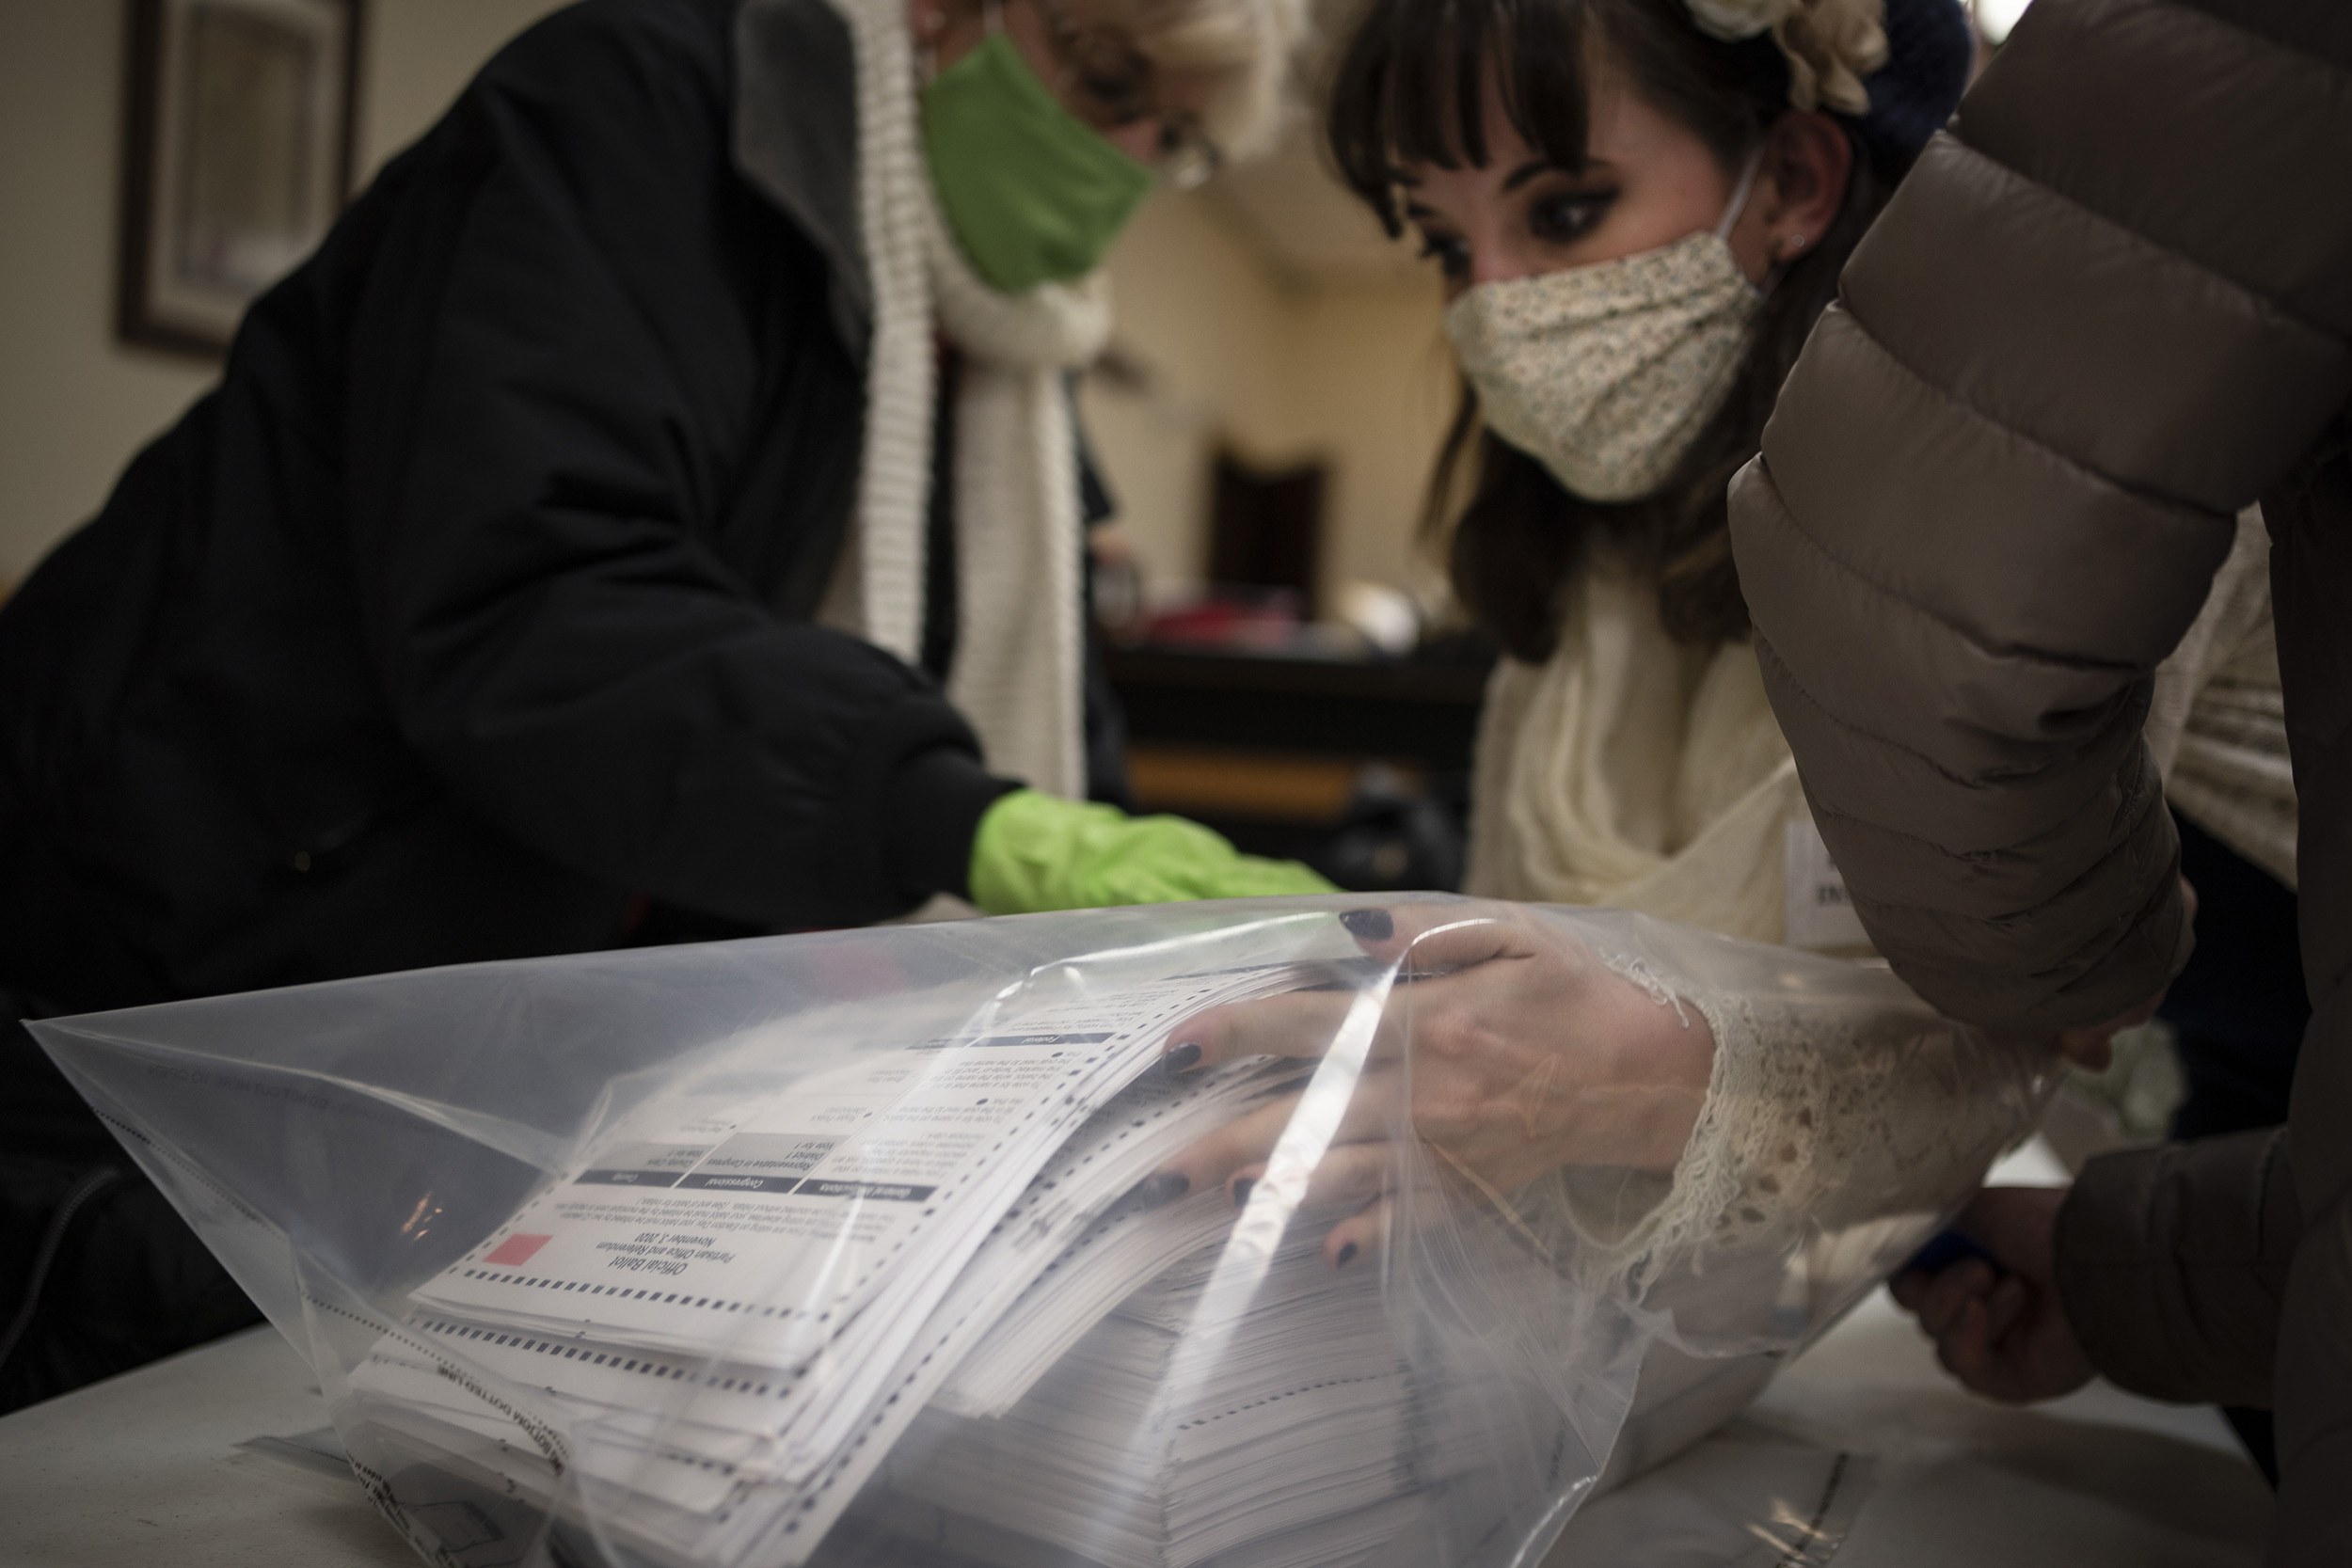 Election staff packing ballots.